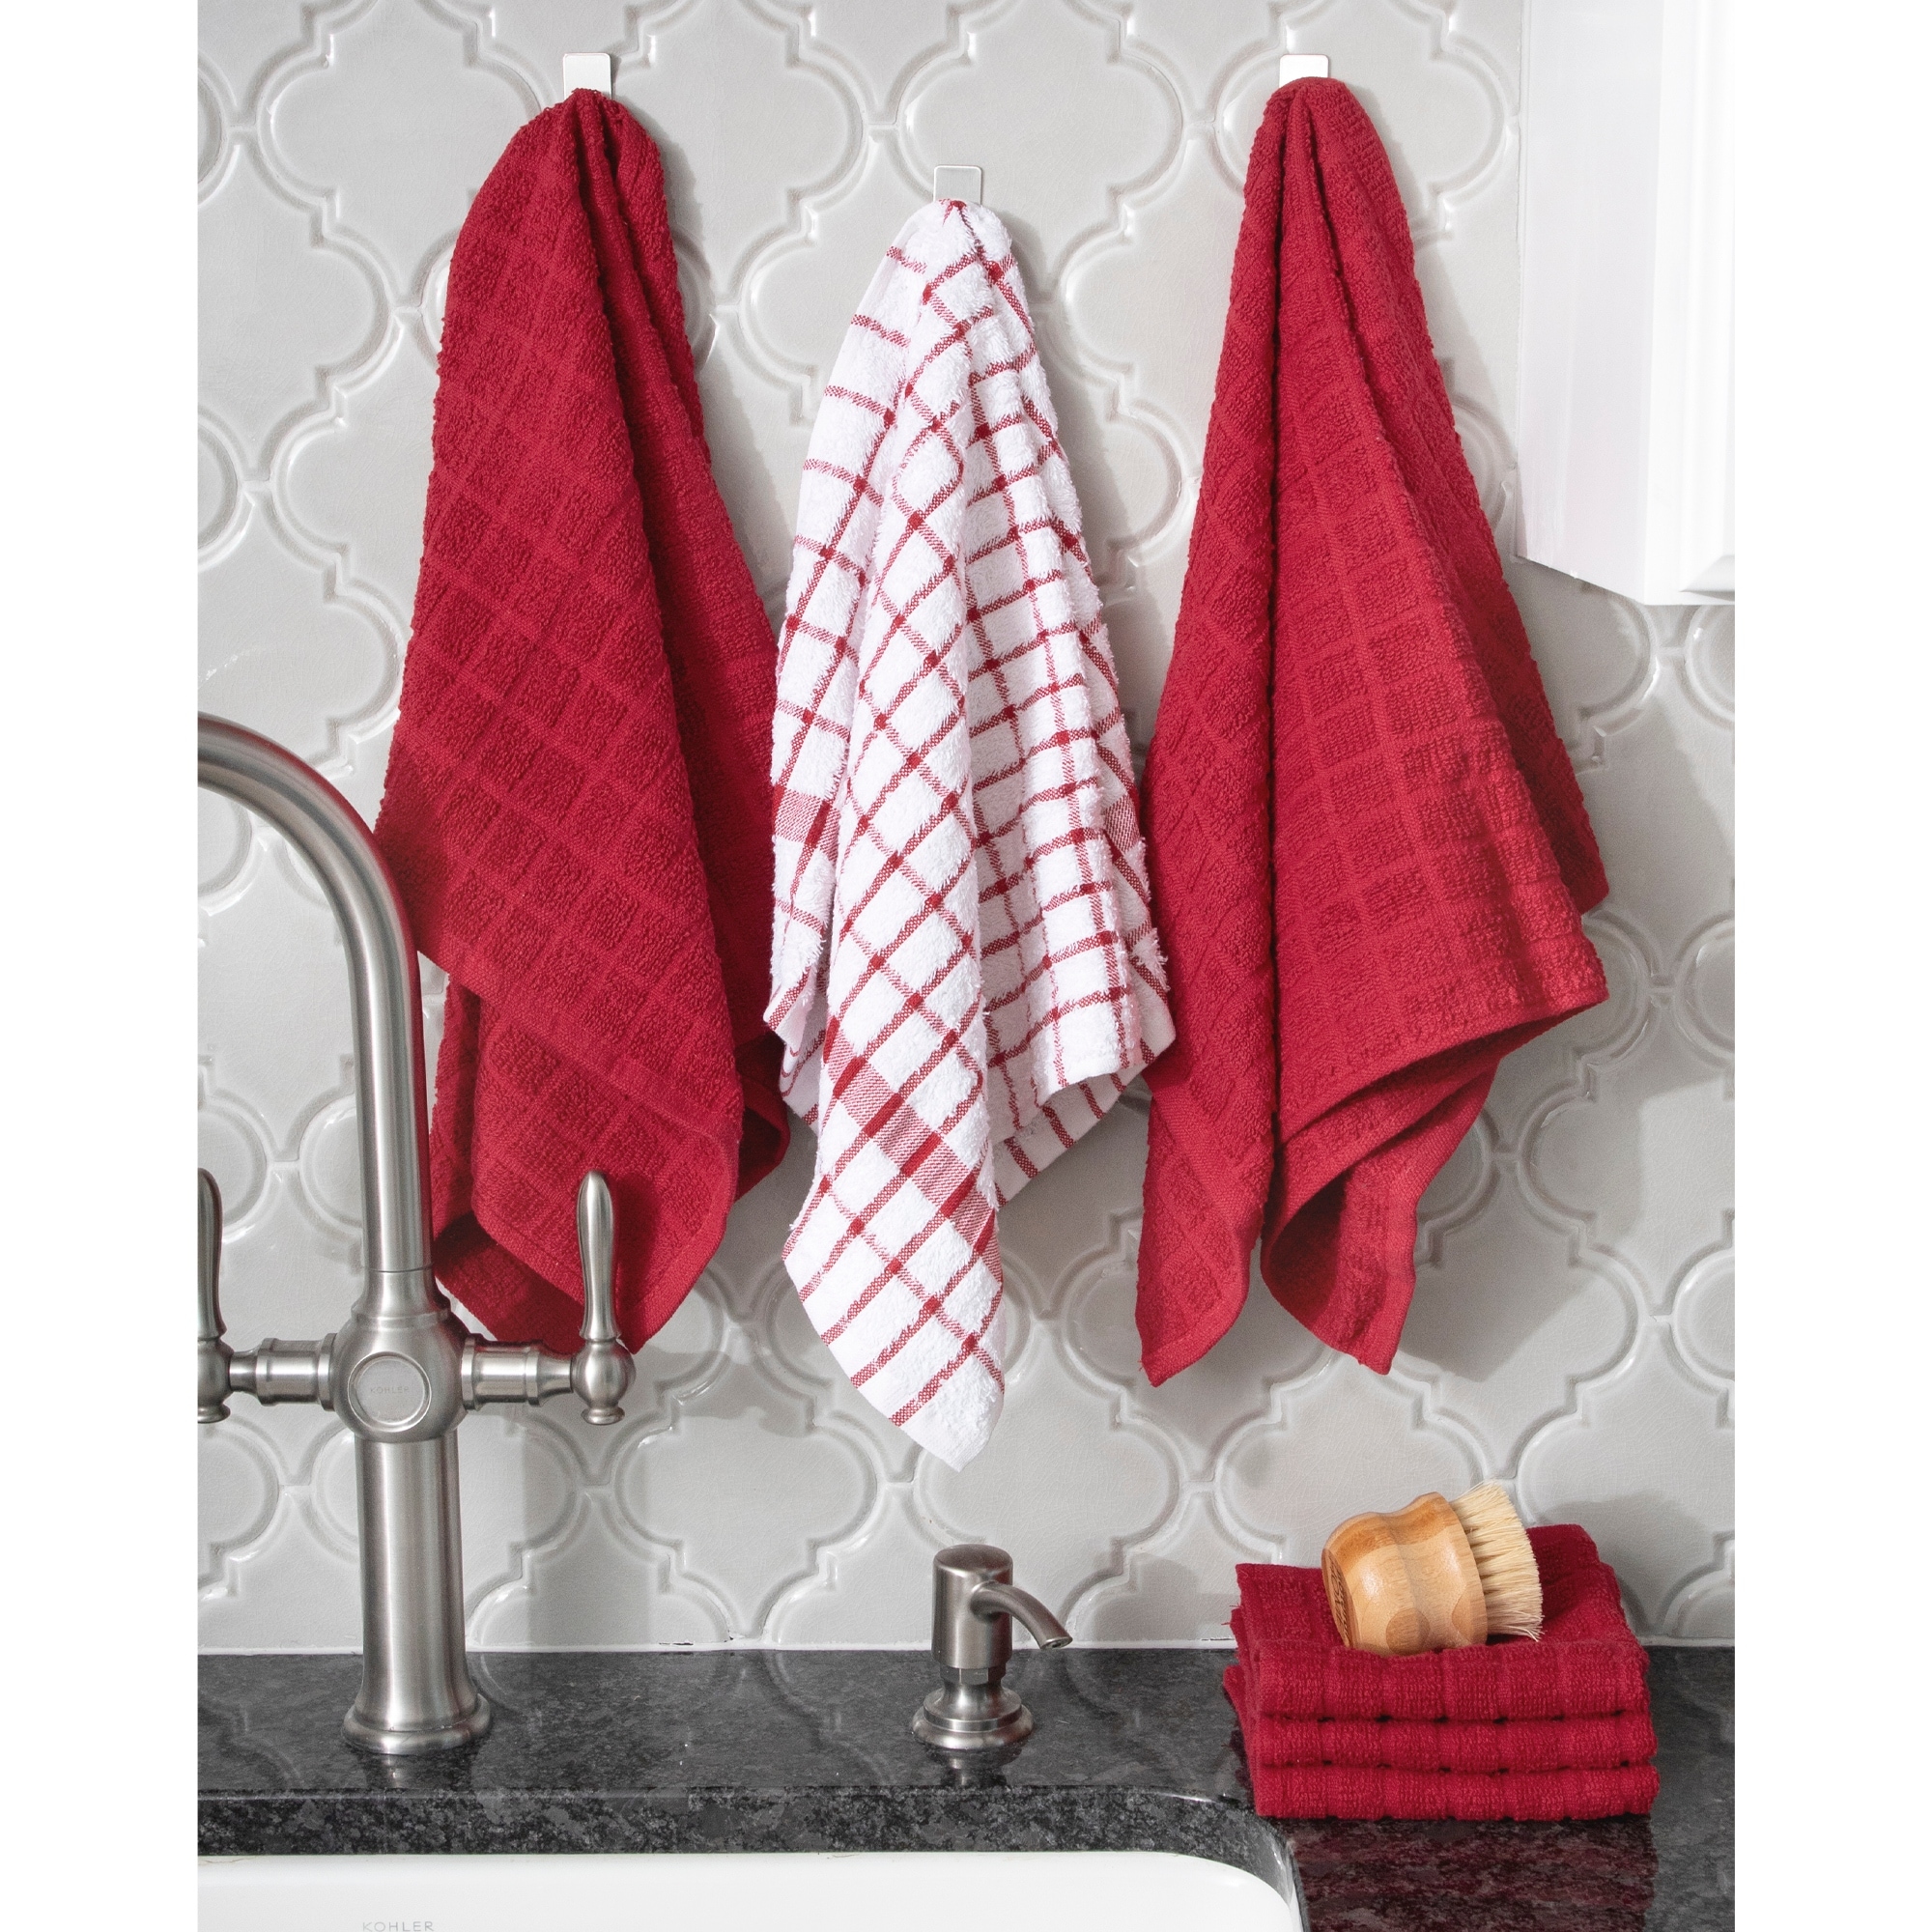 https://ak1.ostkcdn.com/images/products/is/images/direct/0da9226e1bbe825d66474f4a72fe239f526fe4f9/RITZ-Terry-Kitchen-Towel-and-Dish-Cloth%2C-Set-of-3-Towels-and-3-Dish-Cloths.jpg